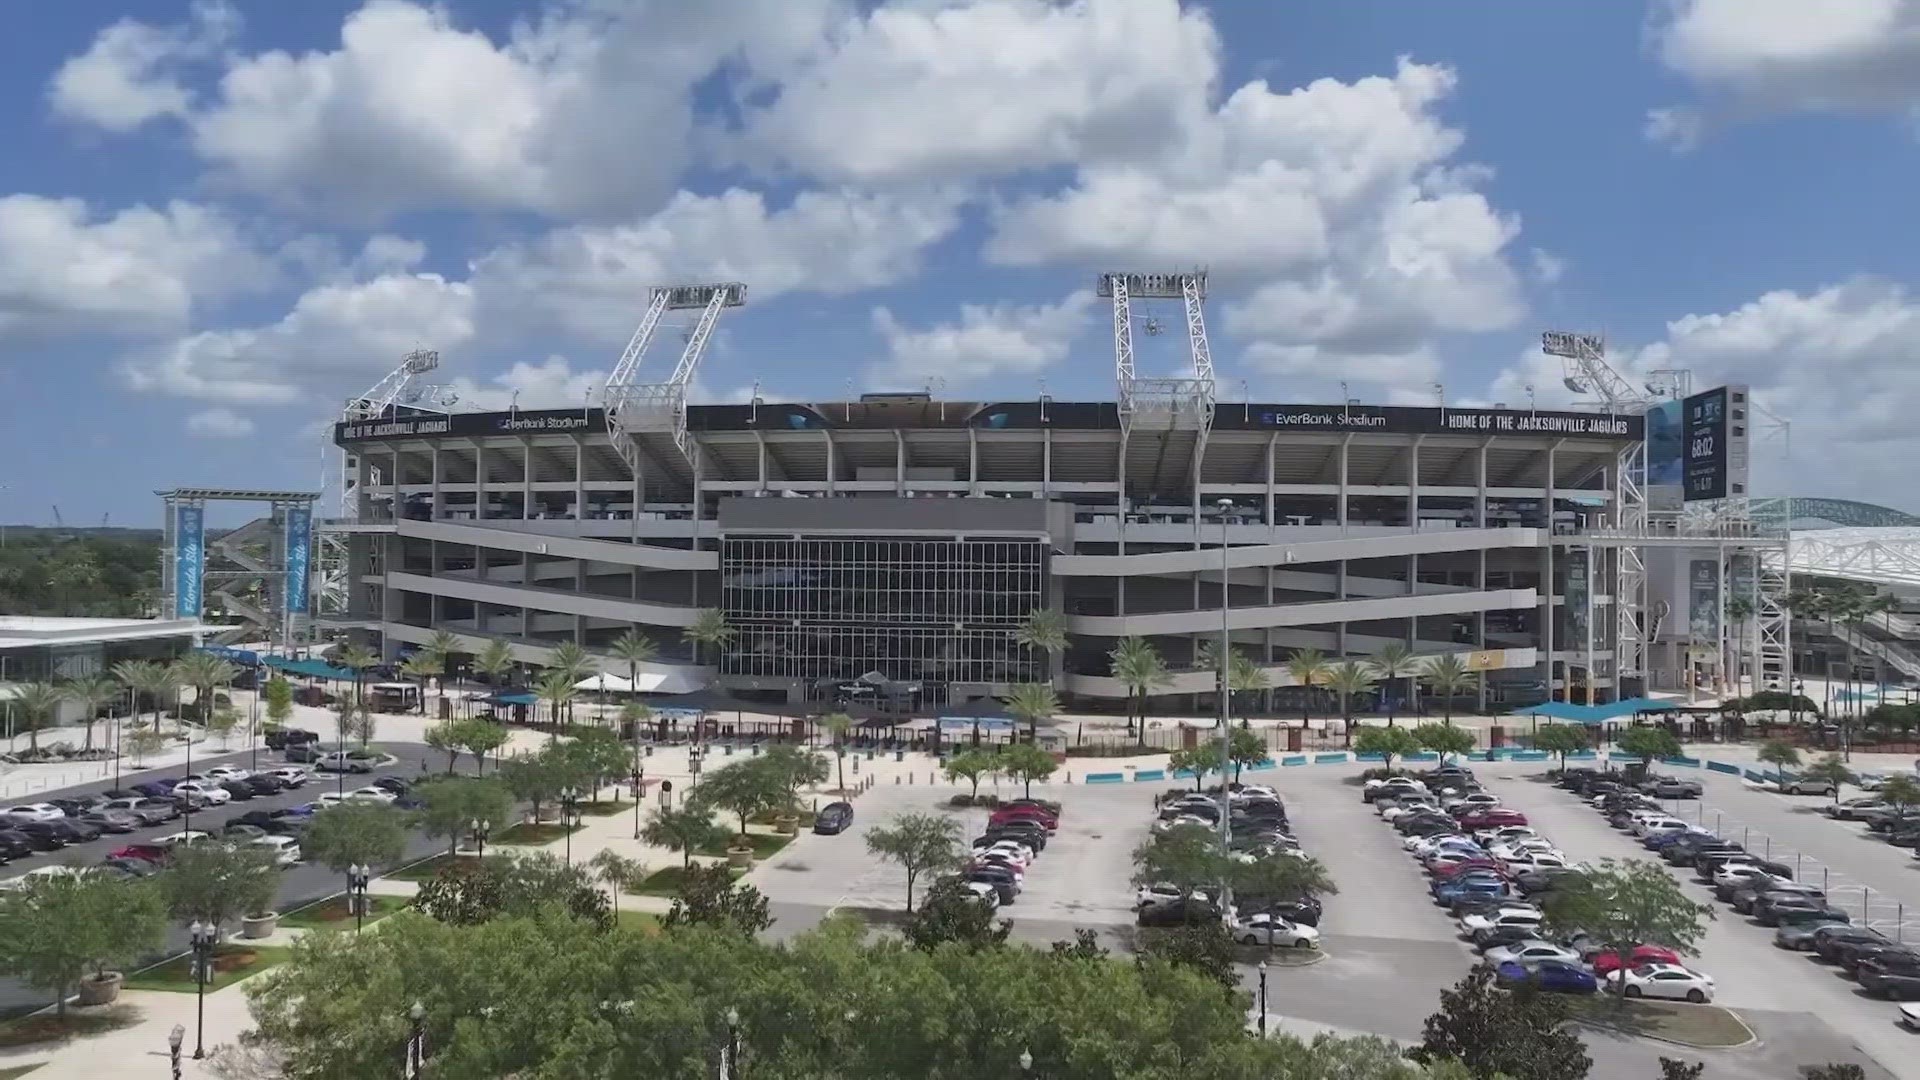 According to a new poll released Monday, 46% support and 47% oppose sending $1B to Jags for renovated stadium.